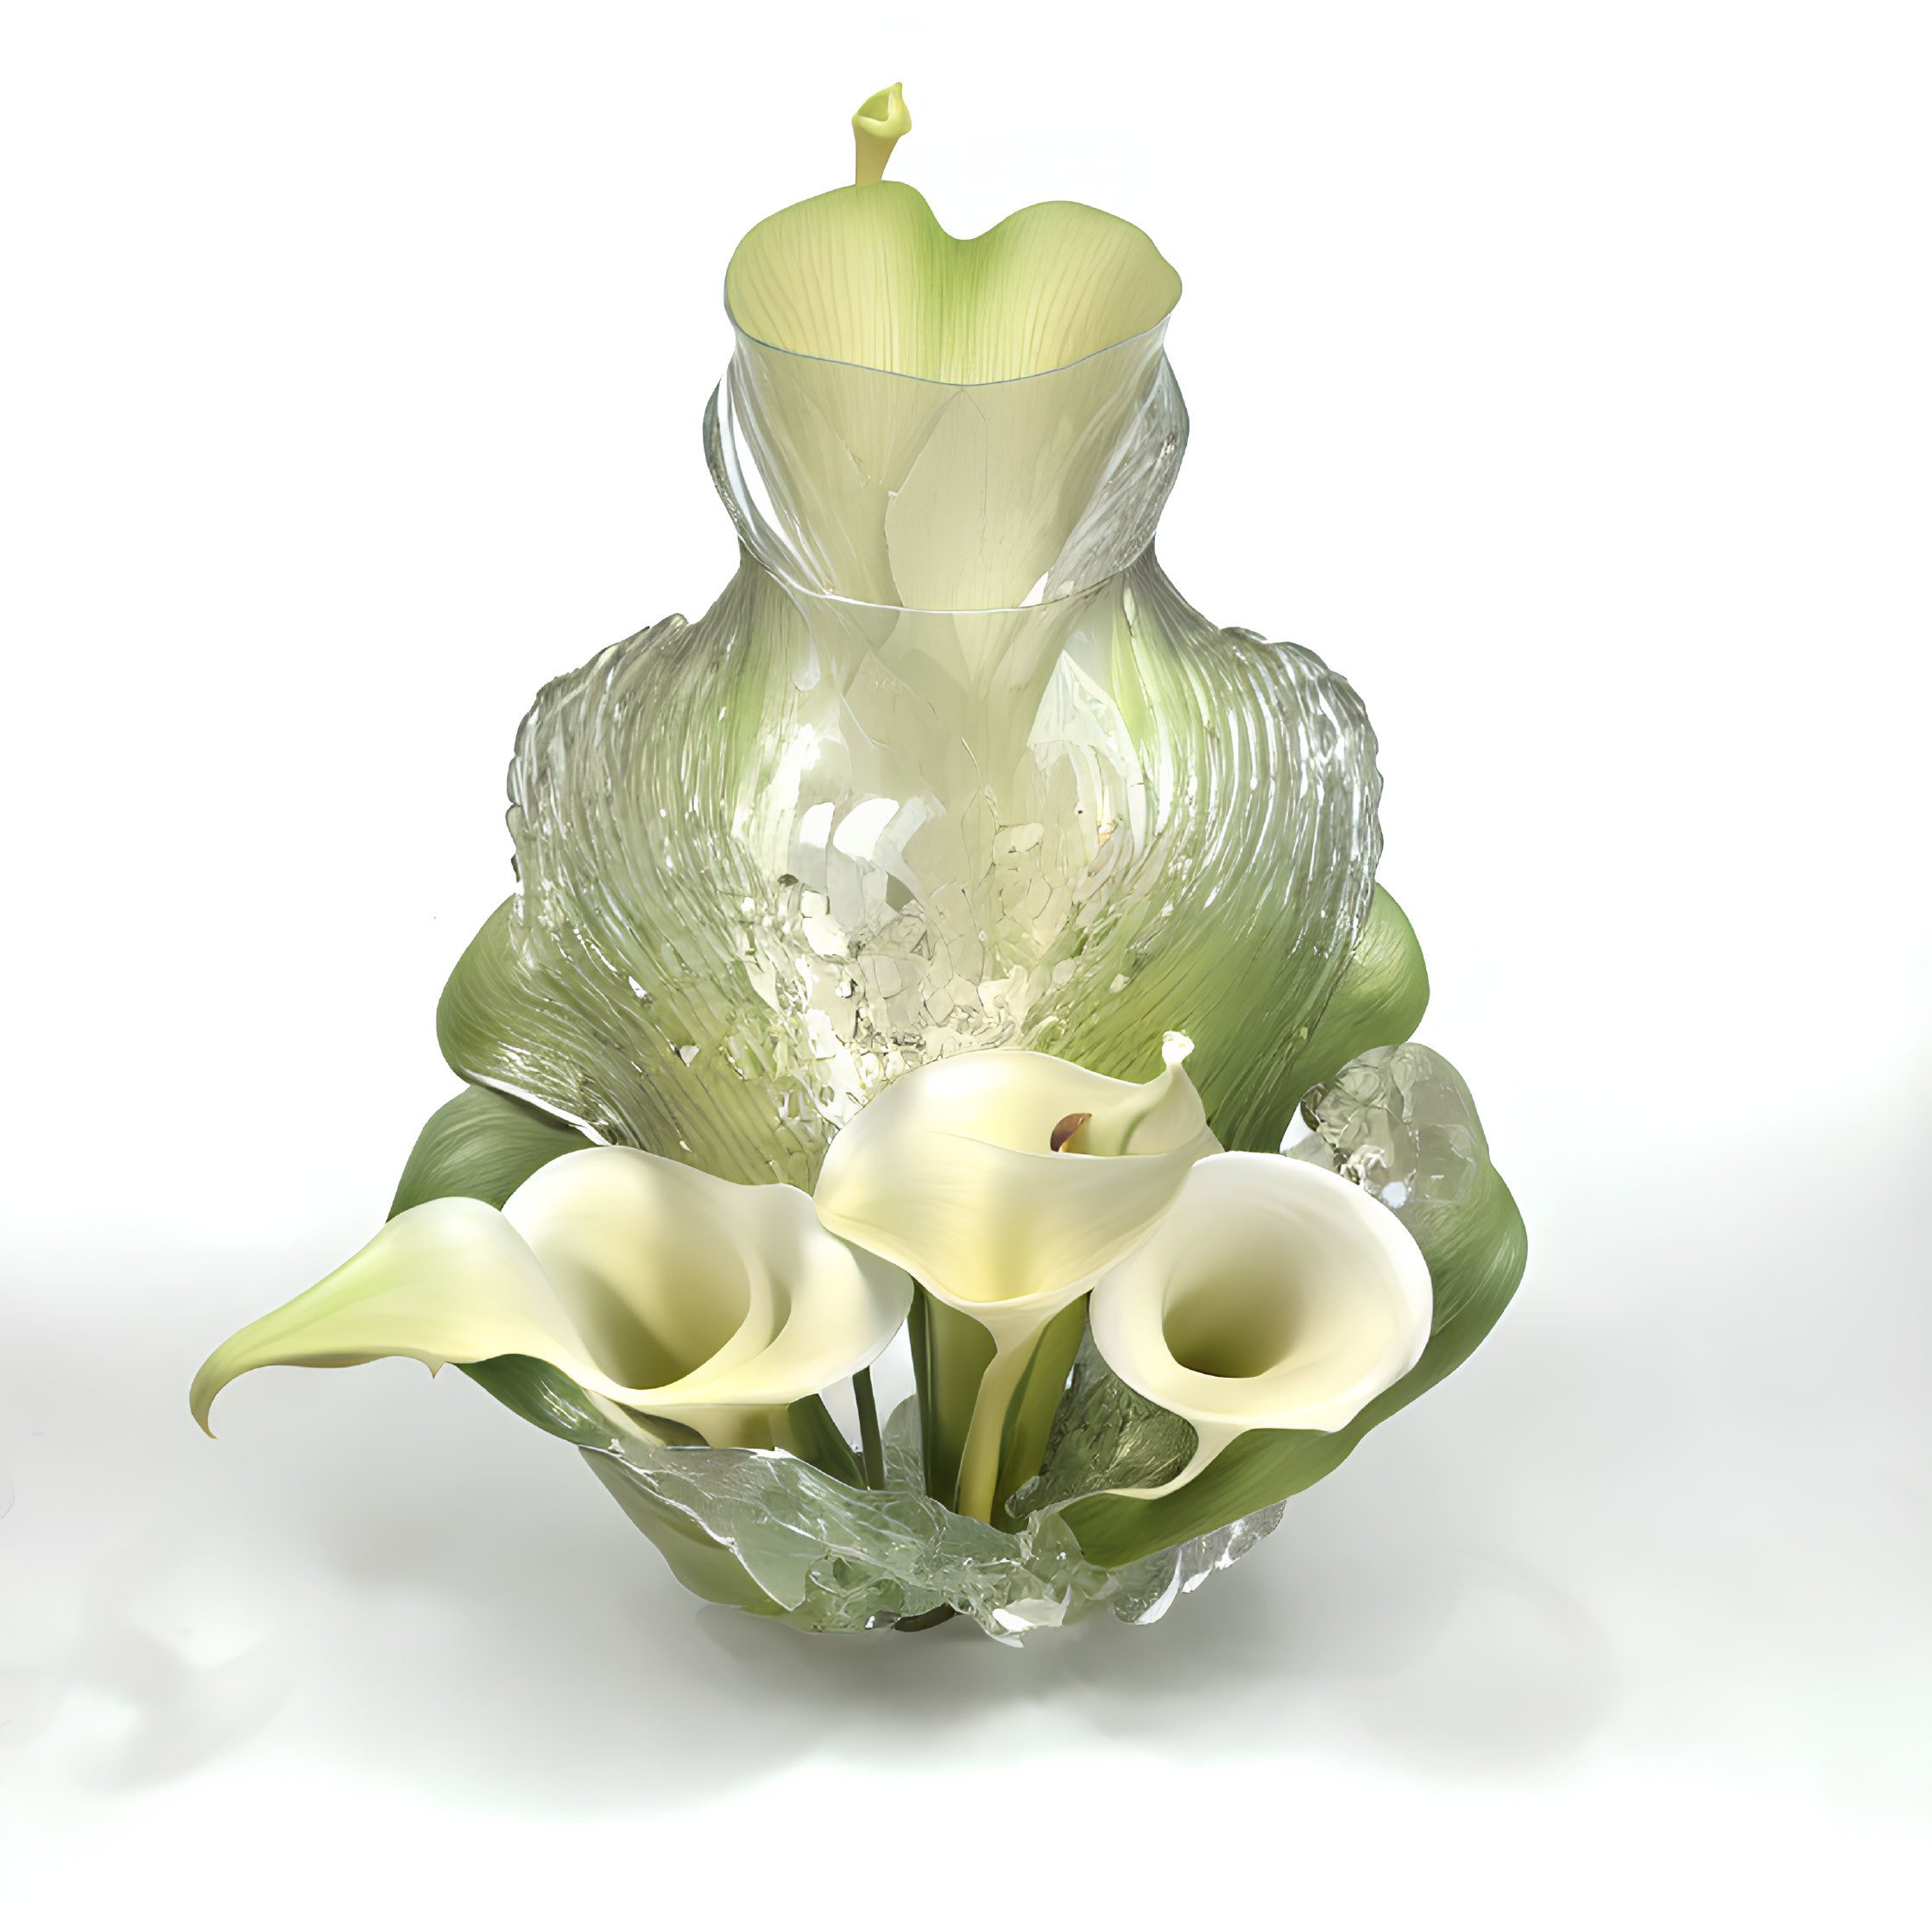 Textured Glass Vase with White Calla Lilies on White Background